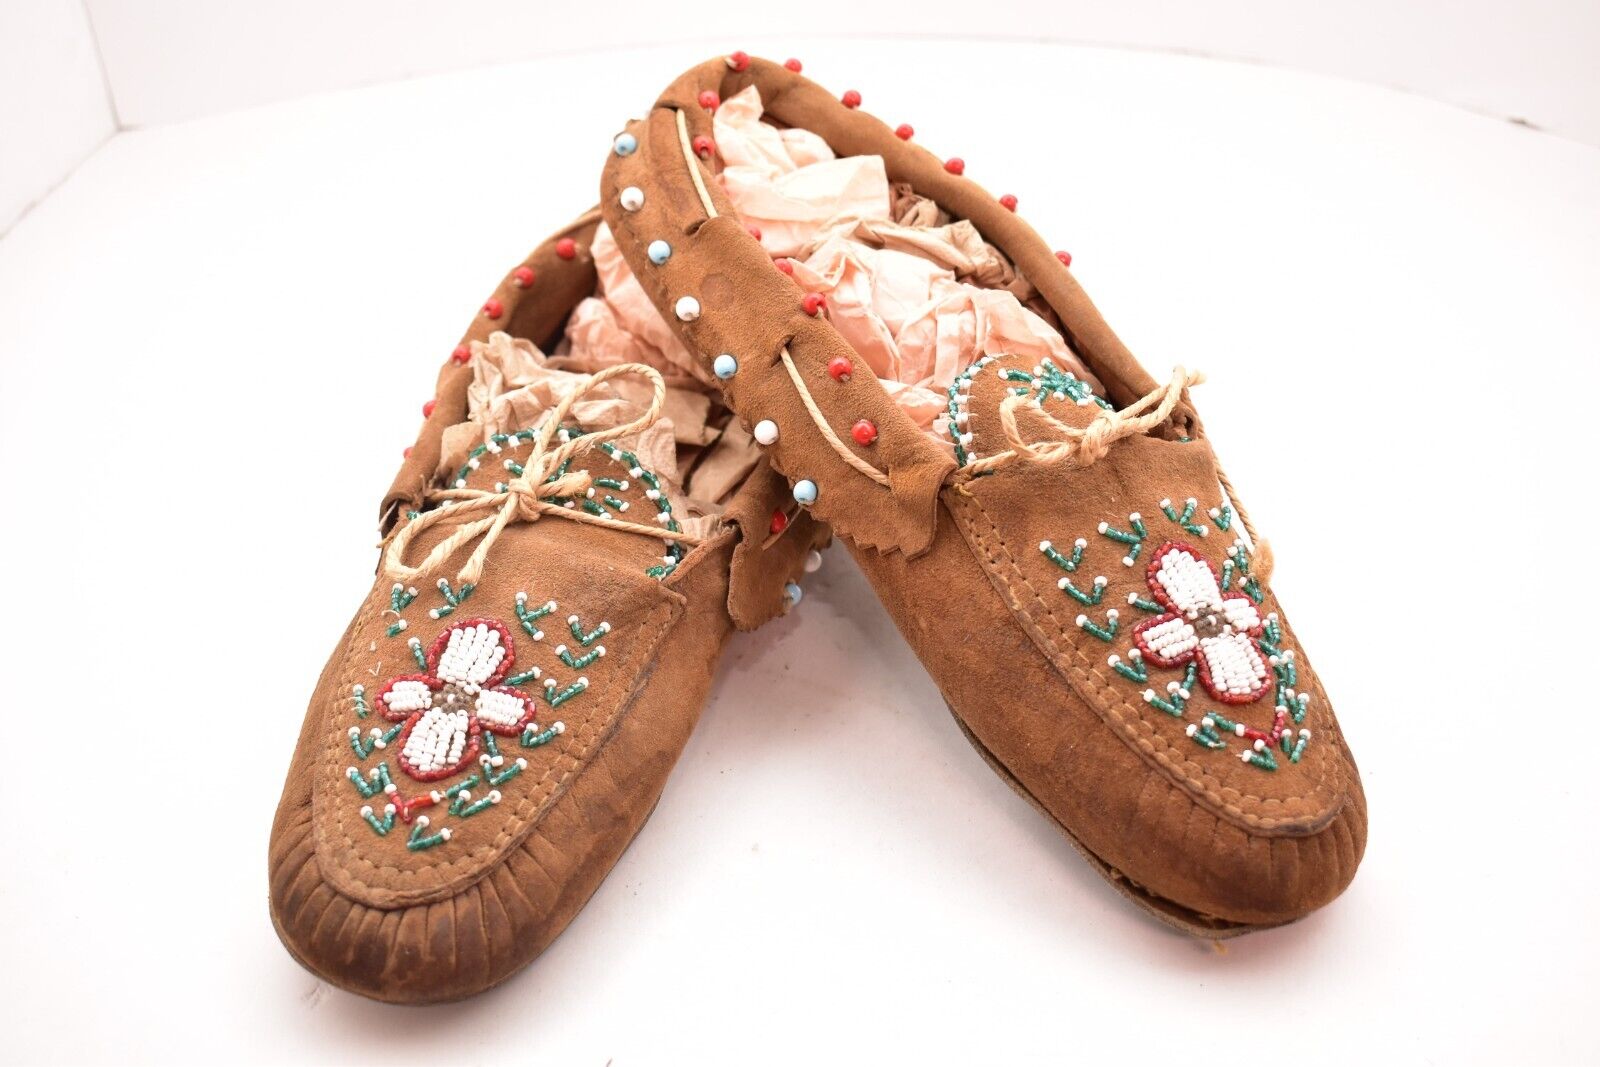 Vintage Native American Cree Indian Handmade Beaded Leather Moccasins ATQ